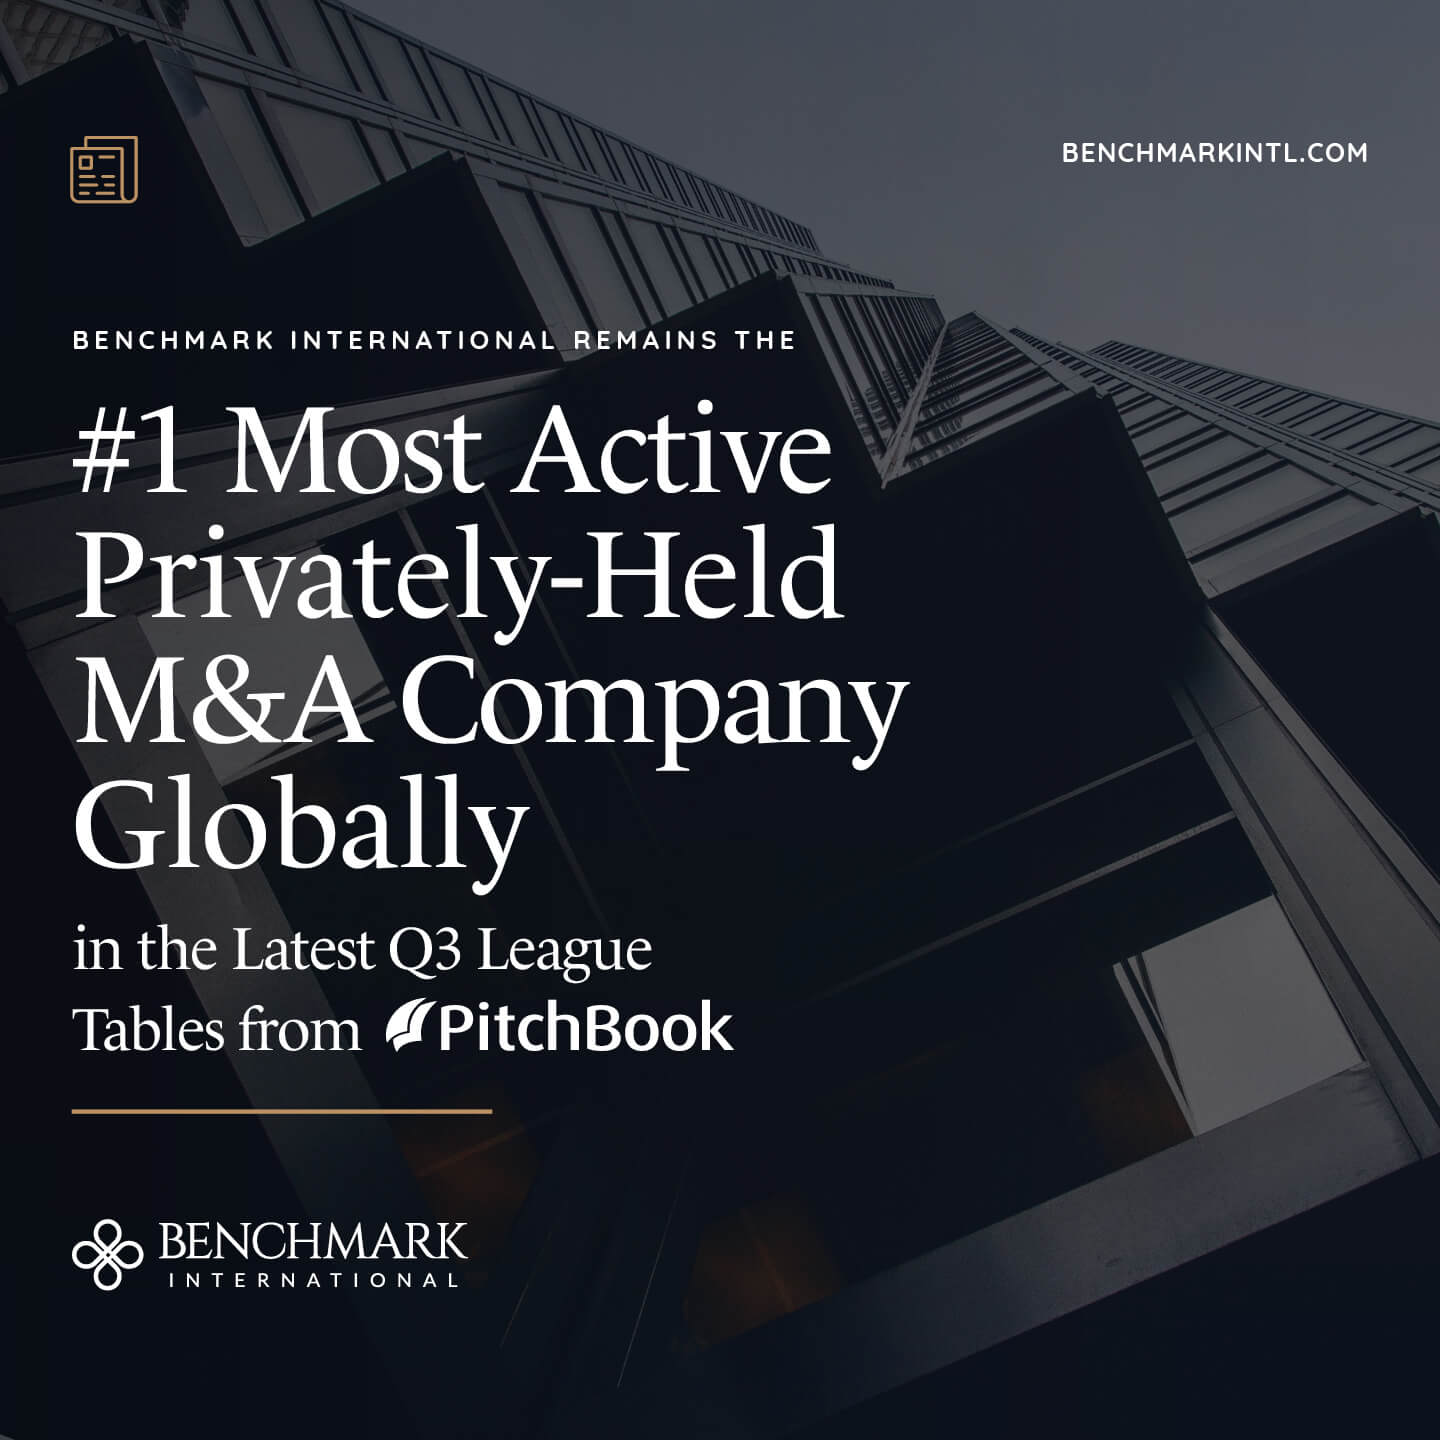 MRKTG_Social_New_Strategy_2023_Blog_Mobile-Pitchbook-Active-M&A-Ranking